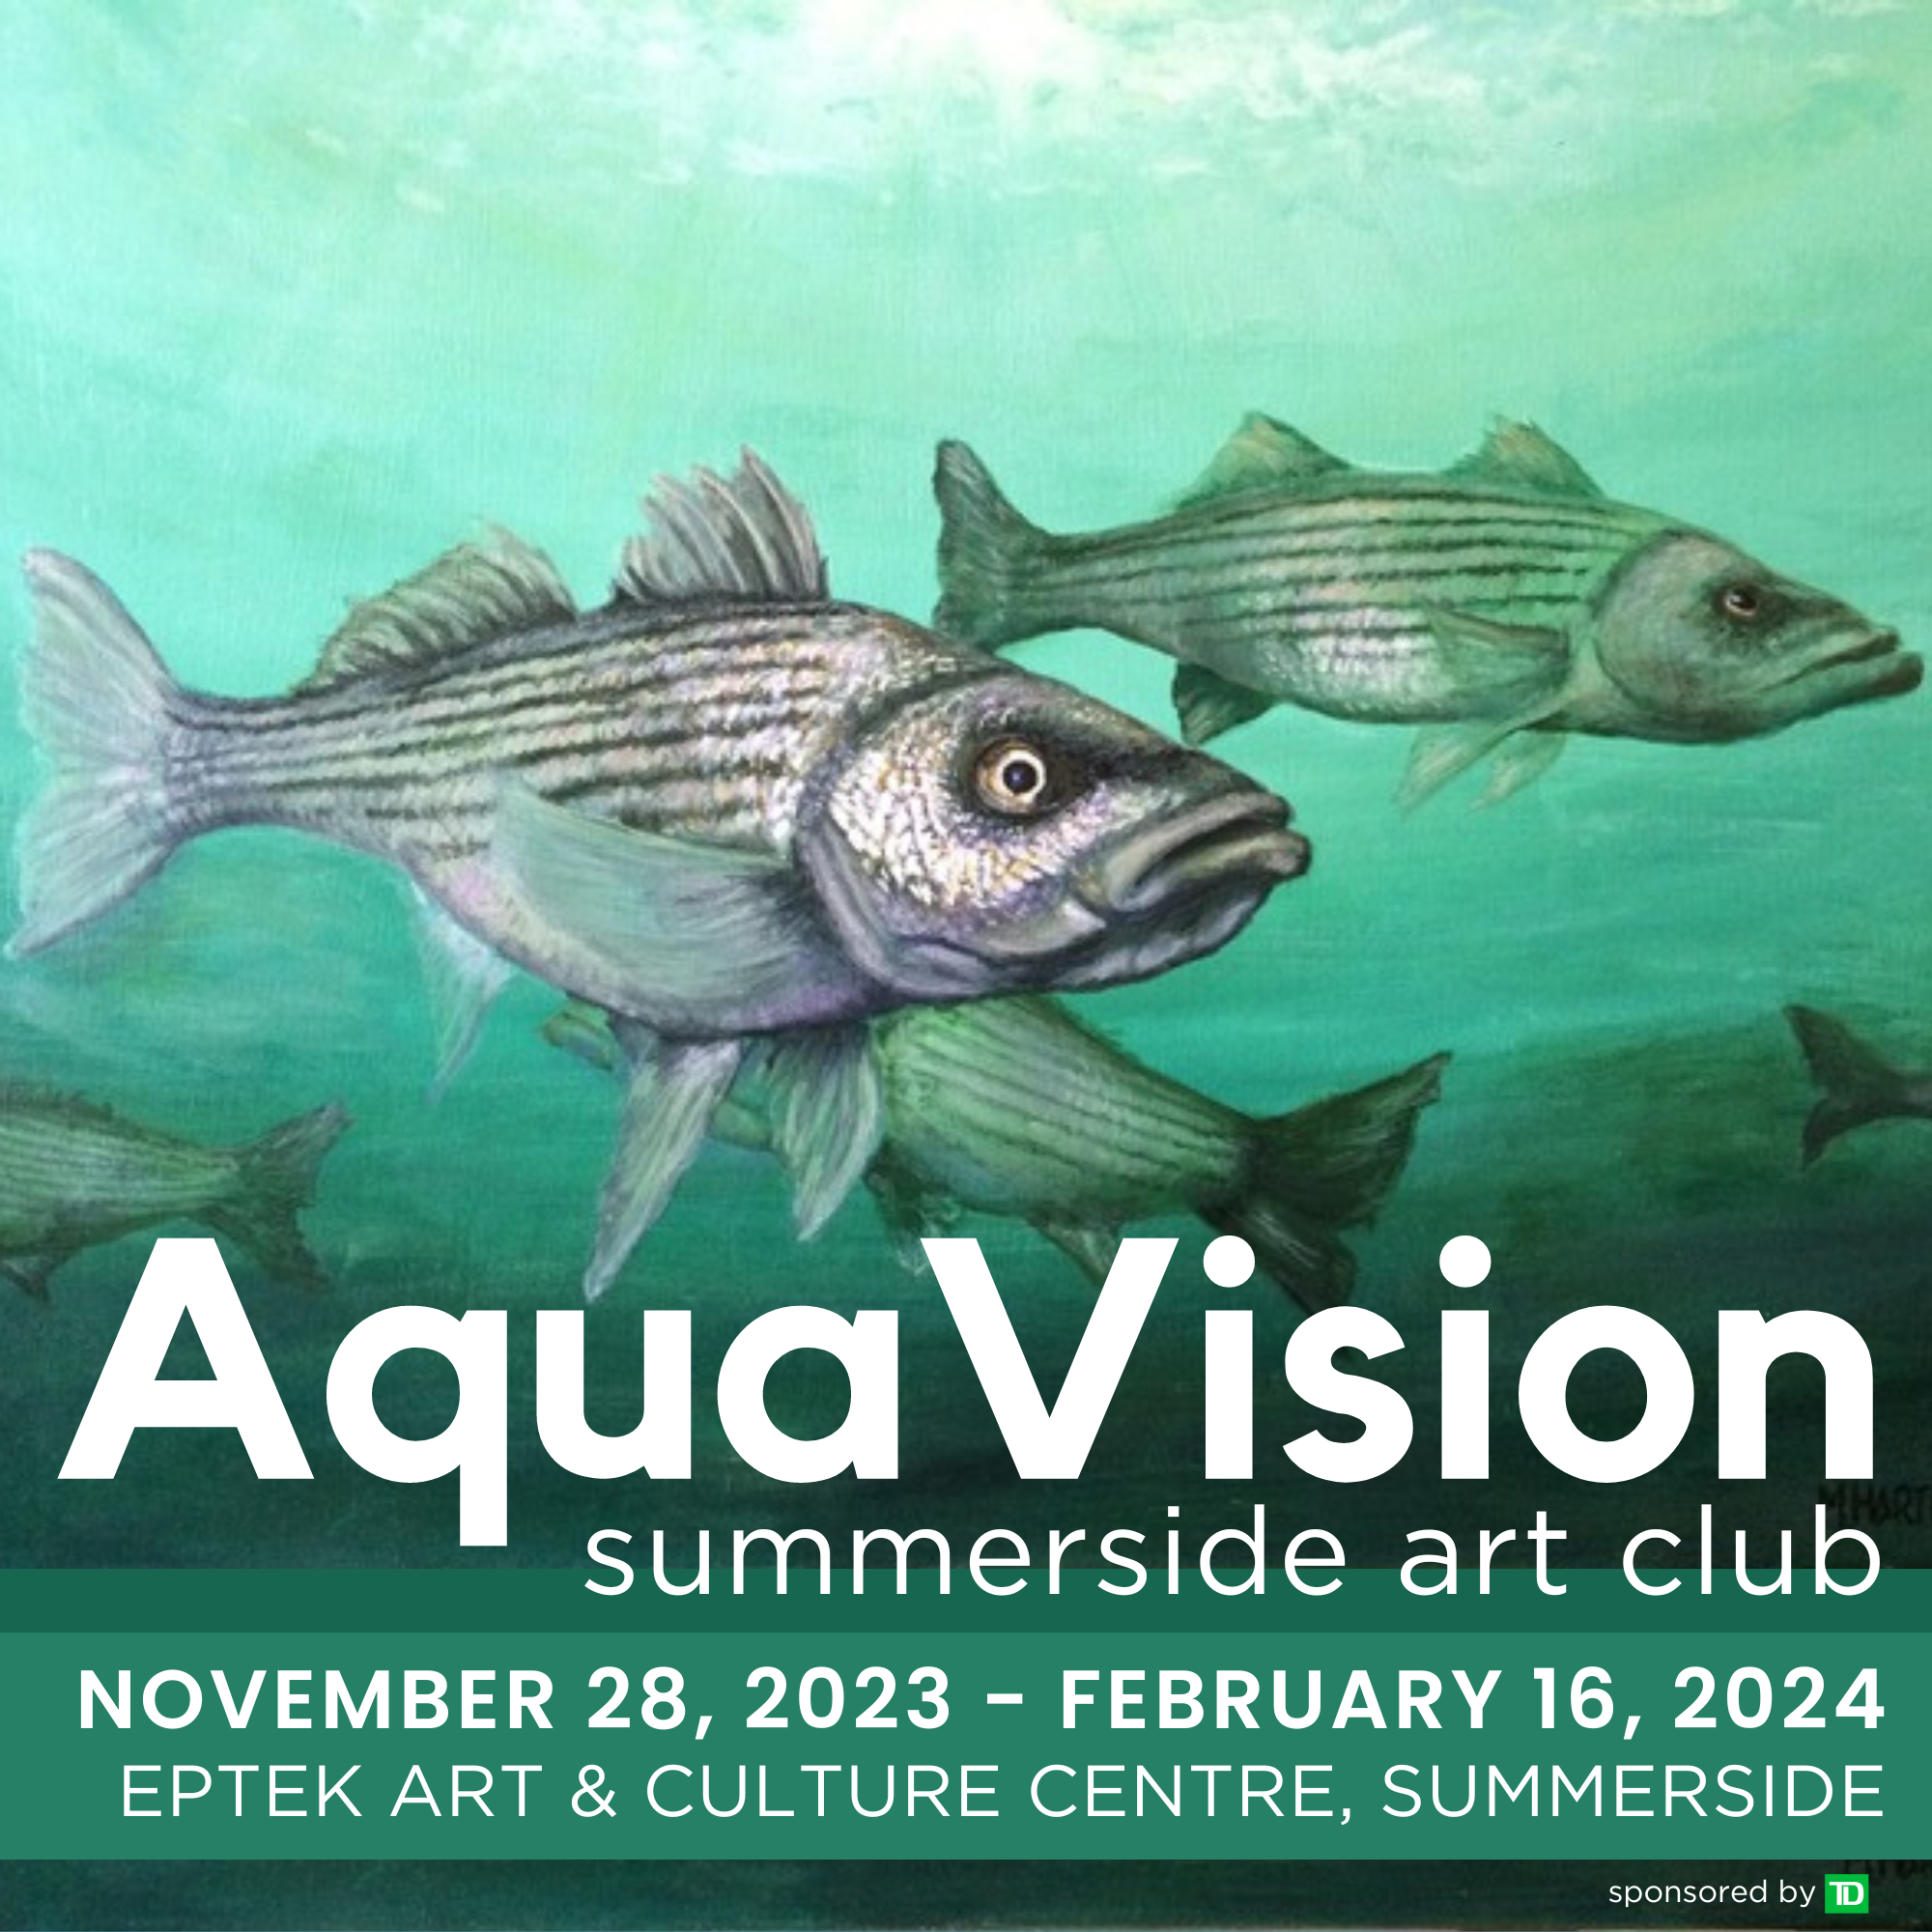 painting of fish and the ocean, with text "AquaVision - Summerside Art Club"